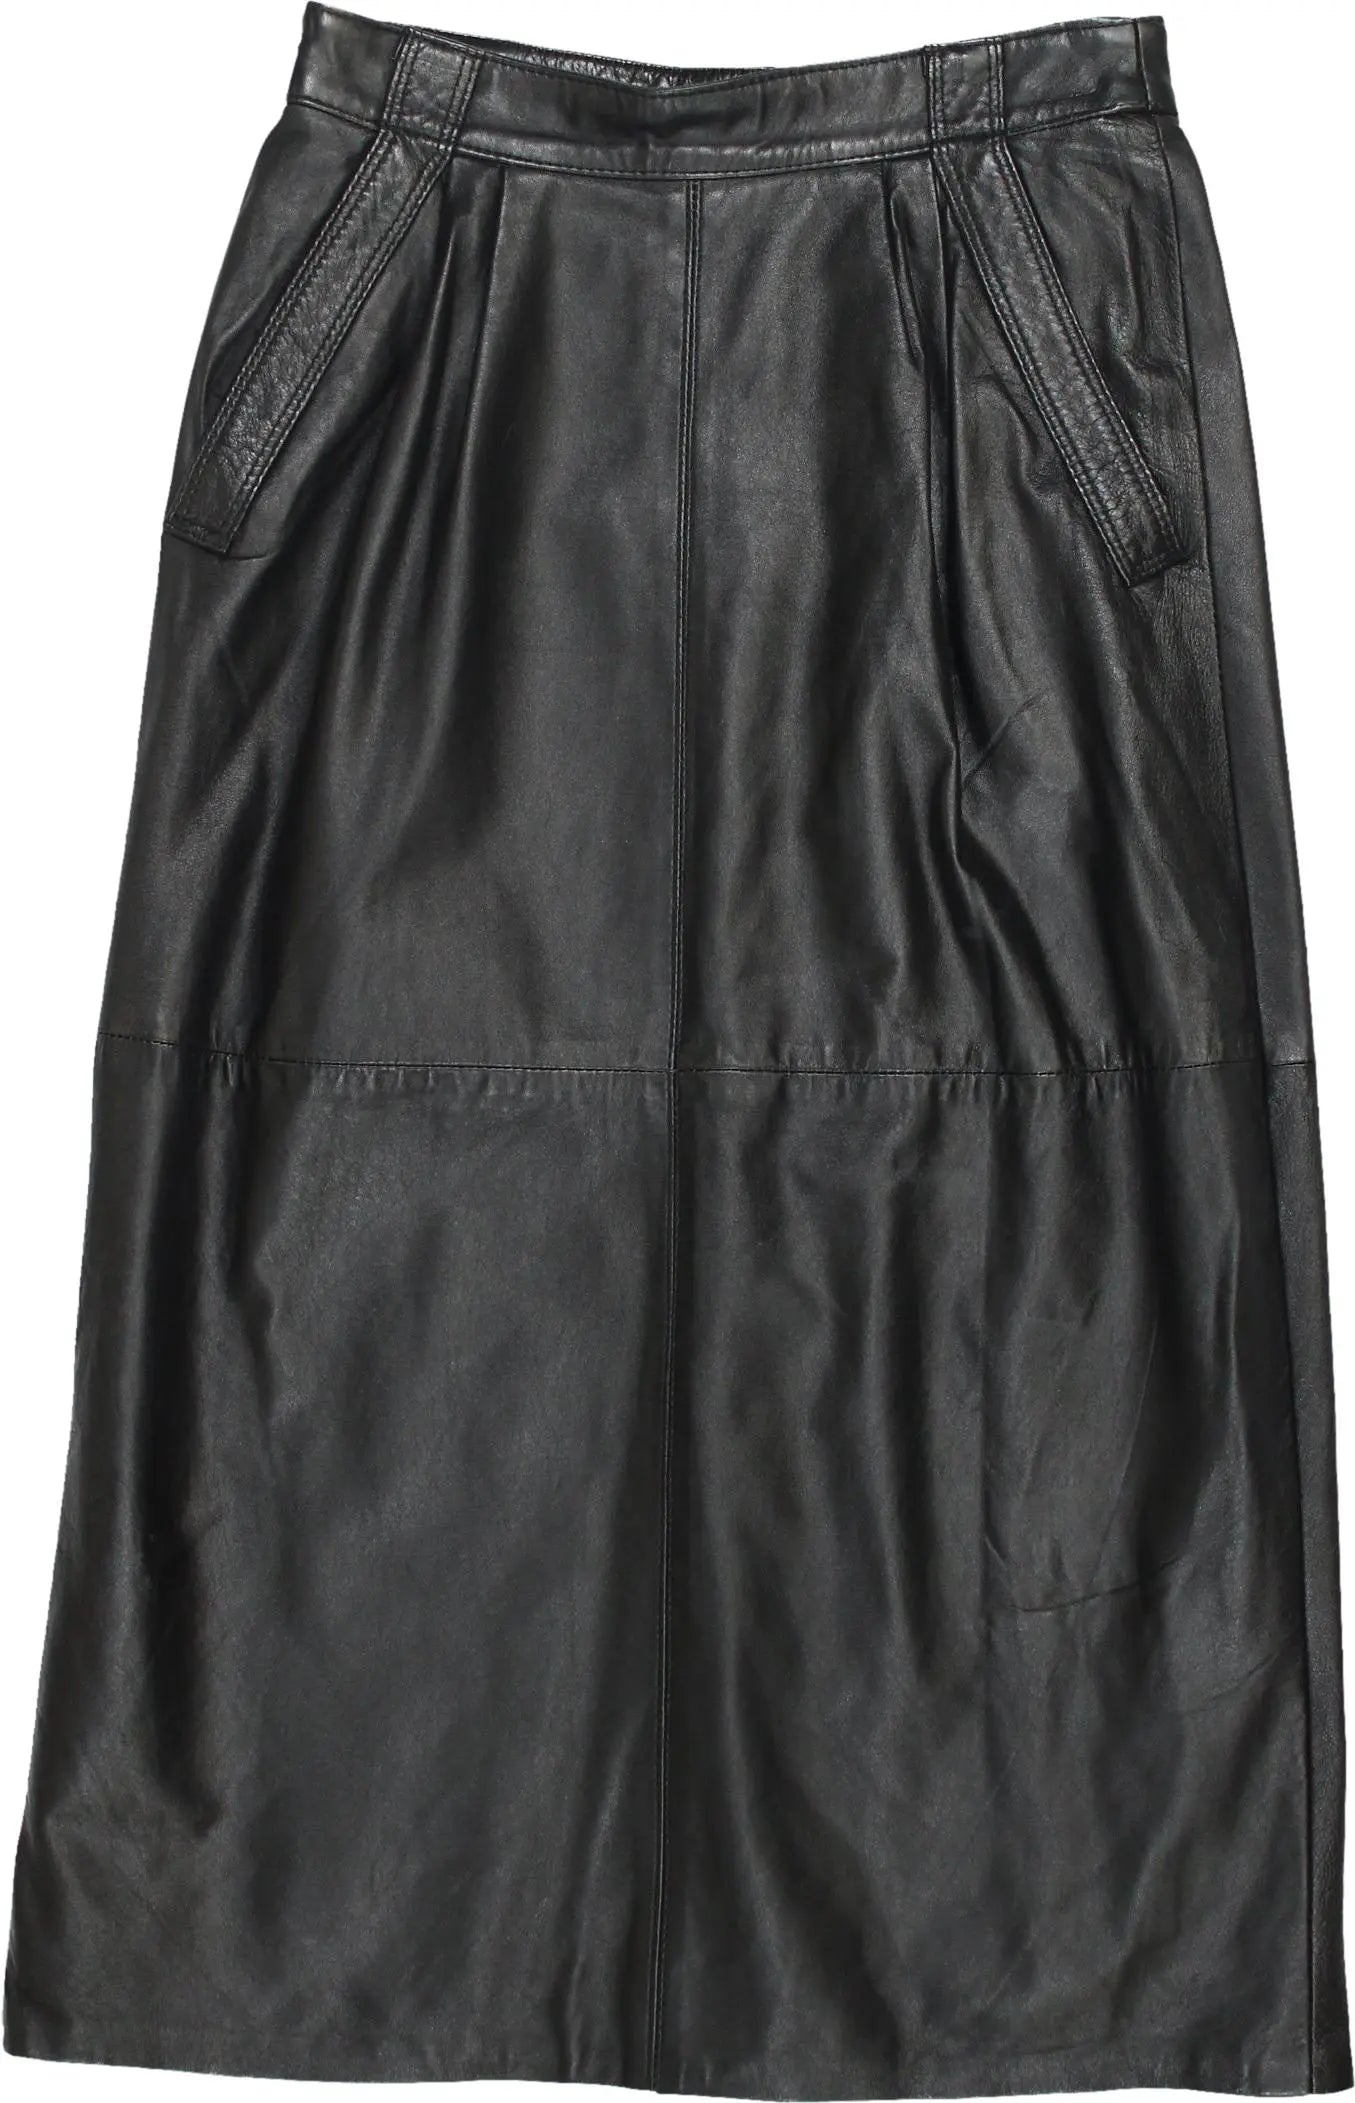 Unknown - Long Leather Skirt- ThriftTale.com - Vintage and second handclothing